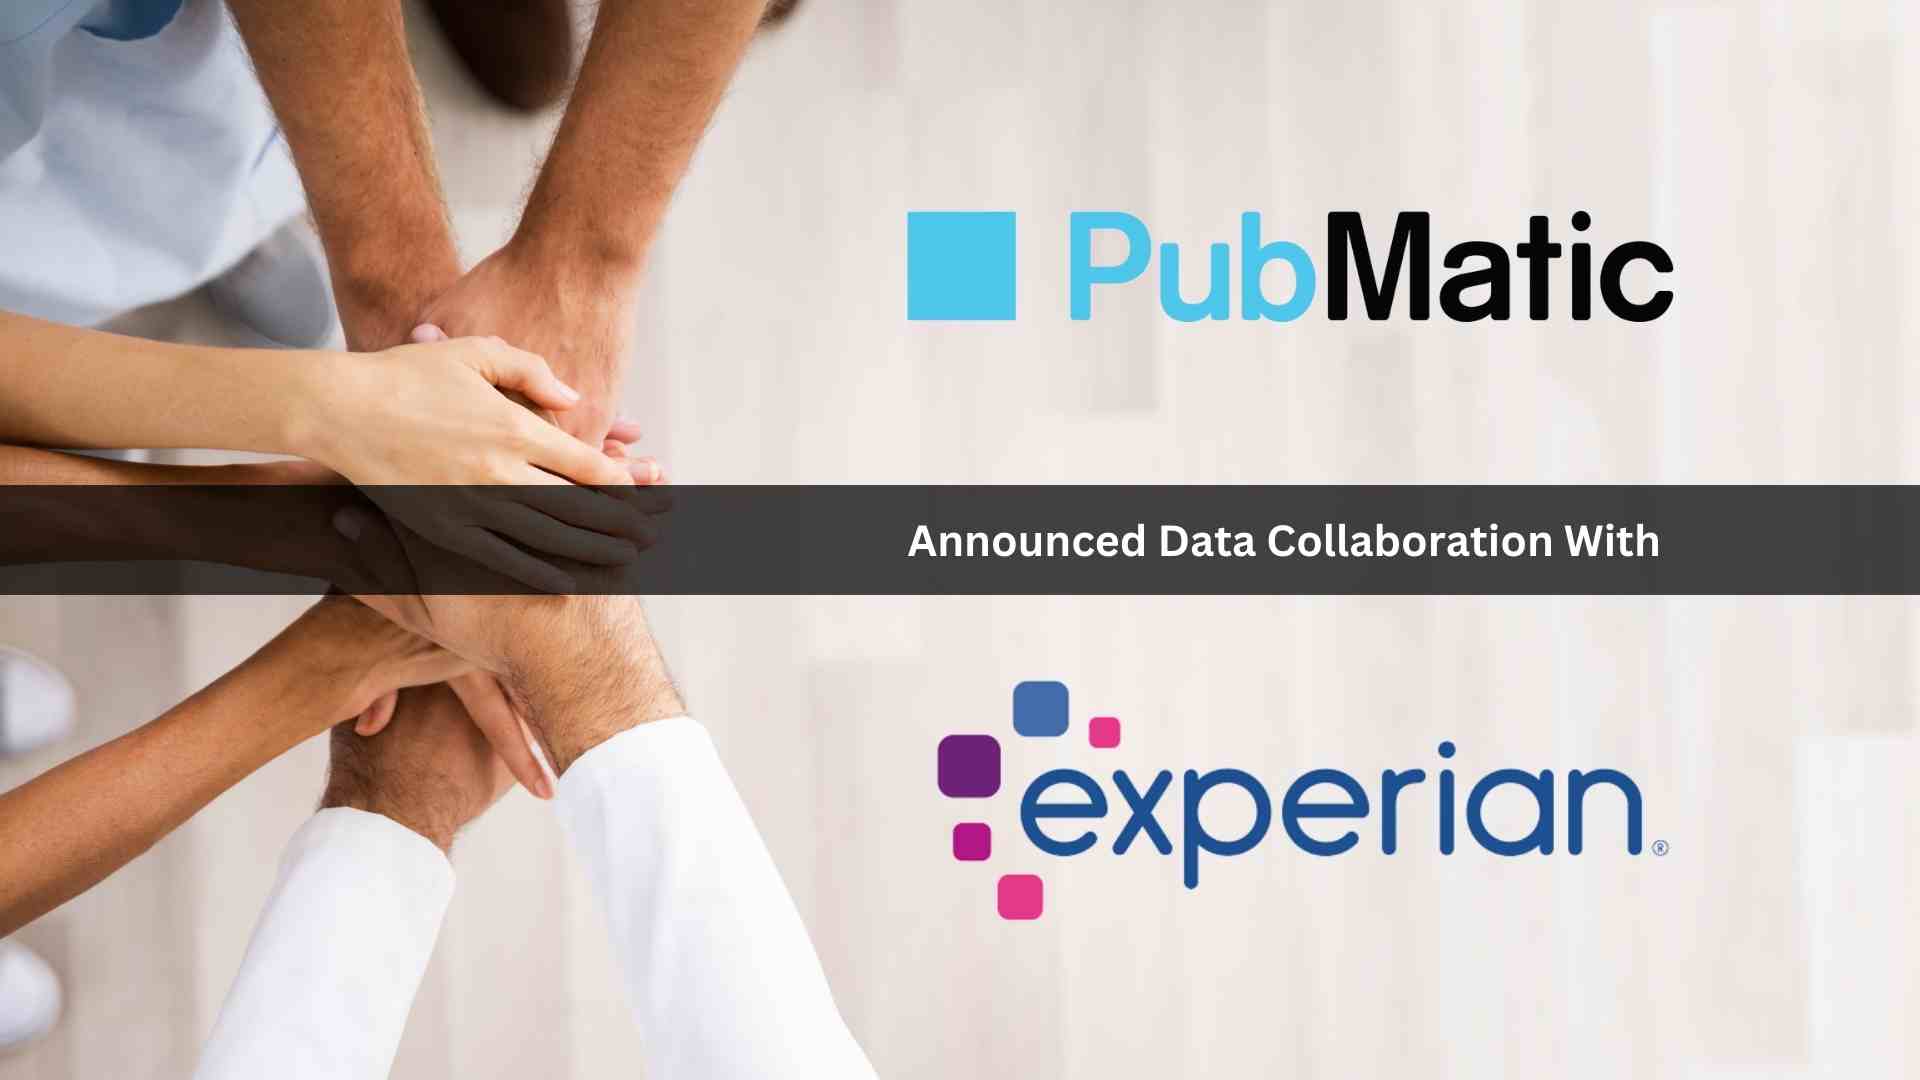 PubMatic is First Sell-Side Technology Provider to Offer Powerful Experian Commerce Data in Both the US and UK